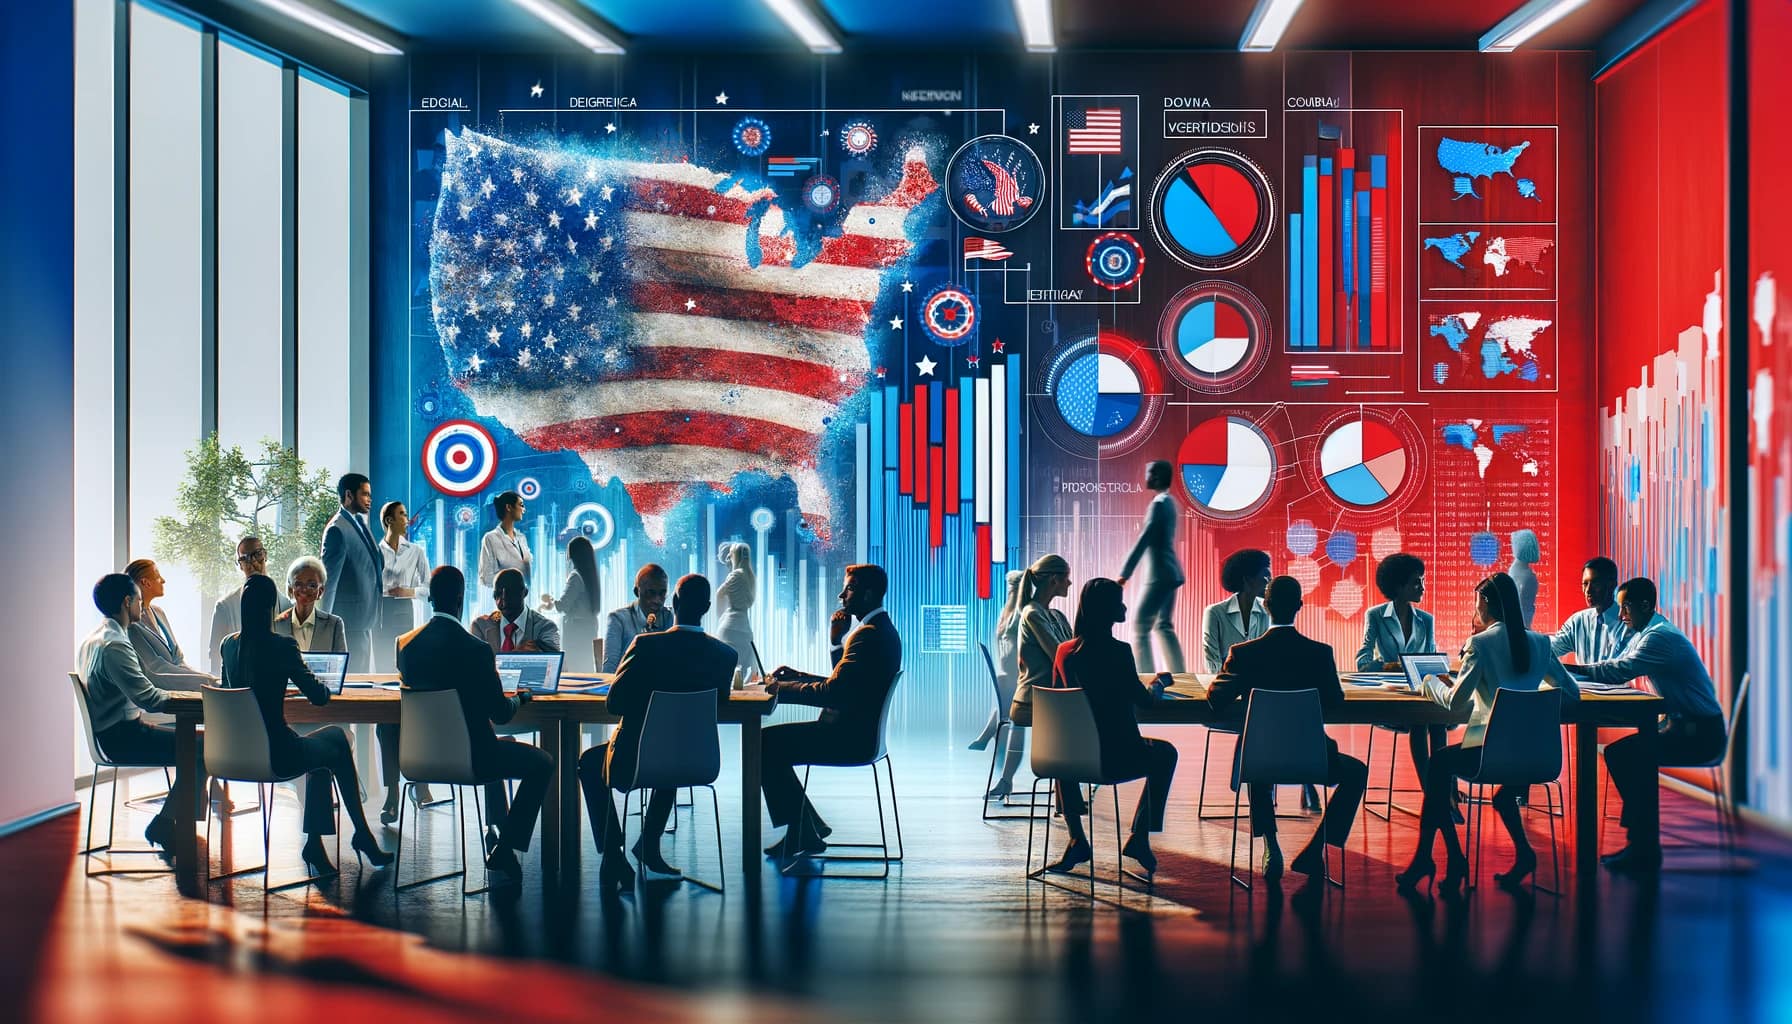 The hero image for your article on strategic campaign planning is ready, featuring a red, white, and blue color scheme that symbolizes the political theme and encapsulates the essence of successful campaign planning.